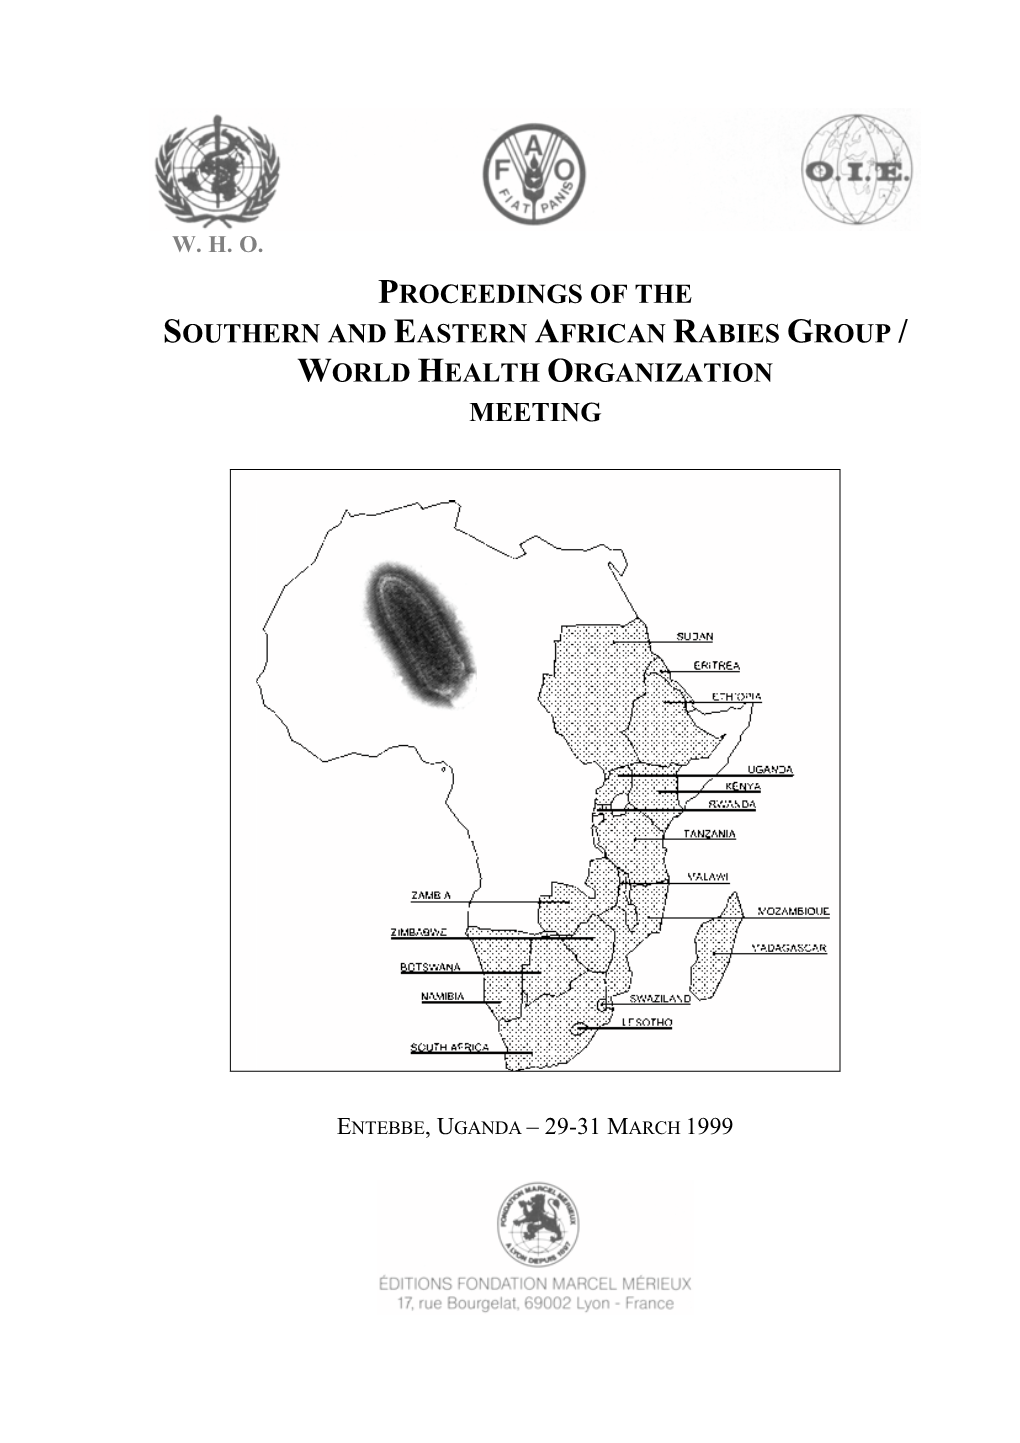 Proceedings of the Southern and Eastern African Rabies Group / World Health Organization Meeting